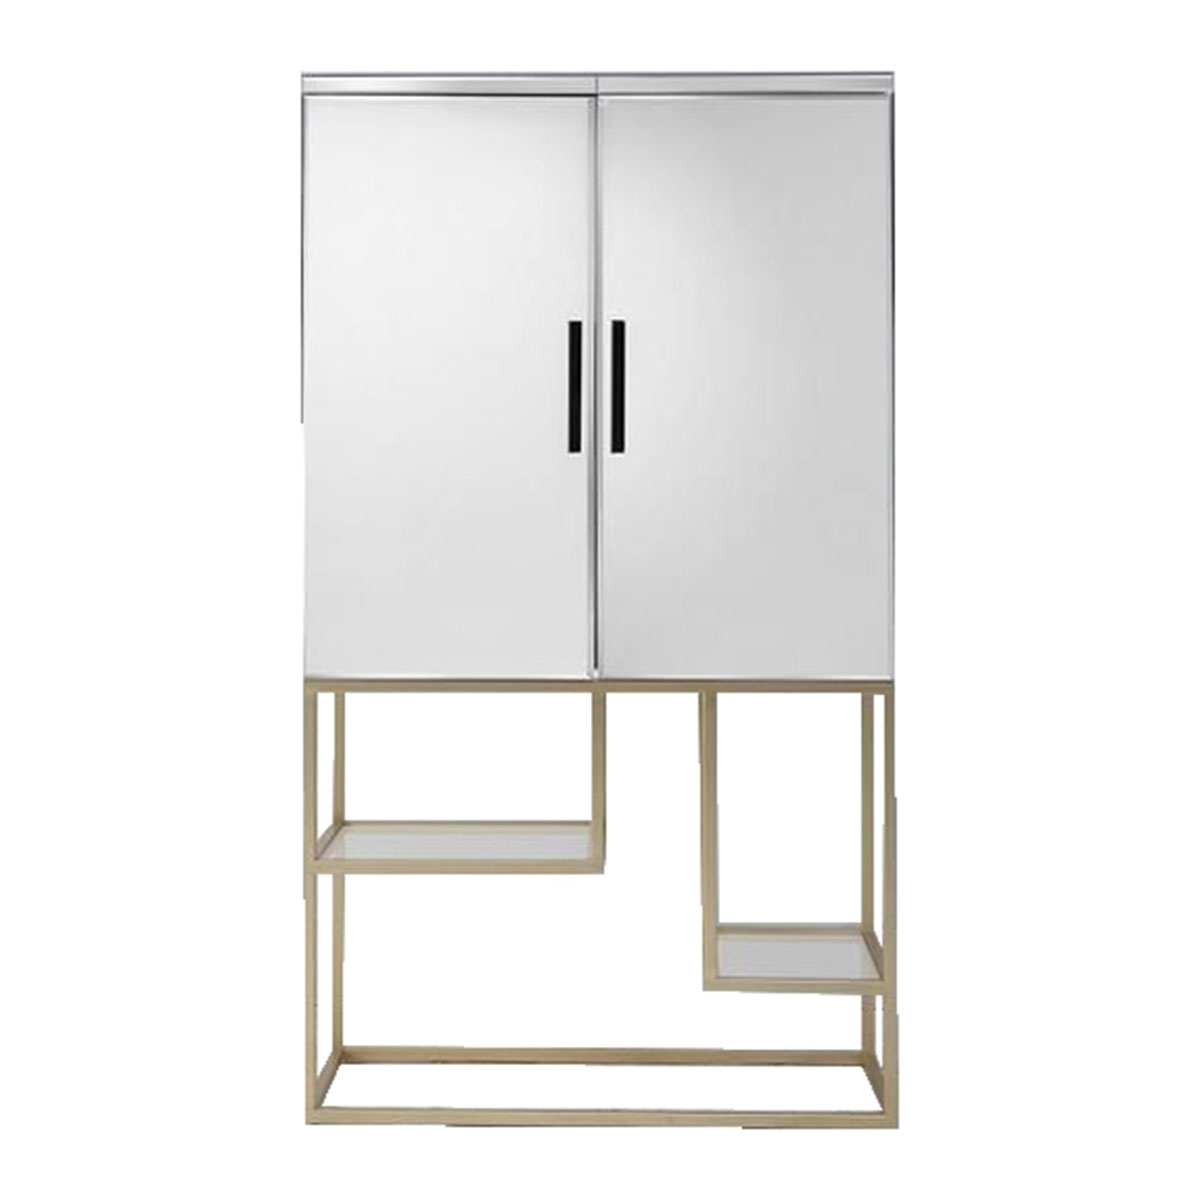 Pippard Cocktail Cabinet Champagne 900x400x1600mm